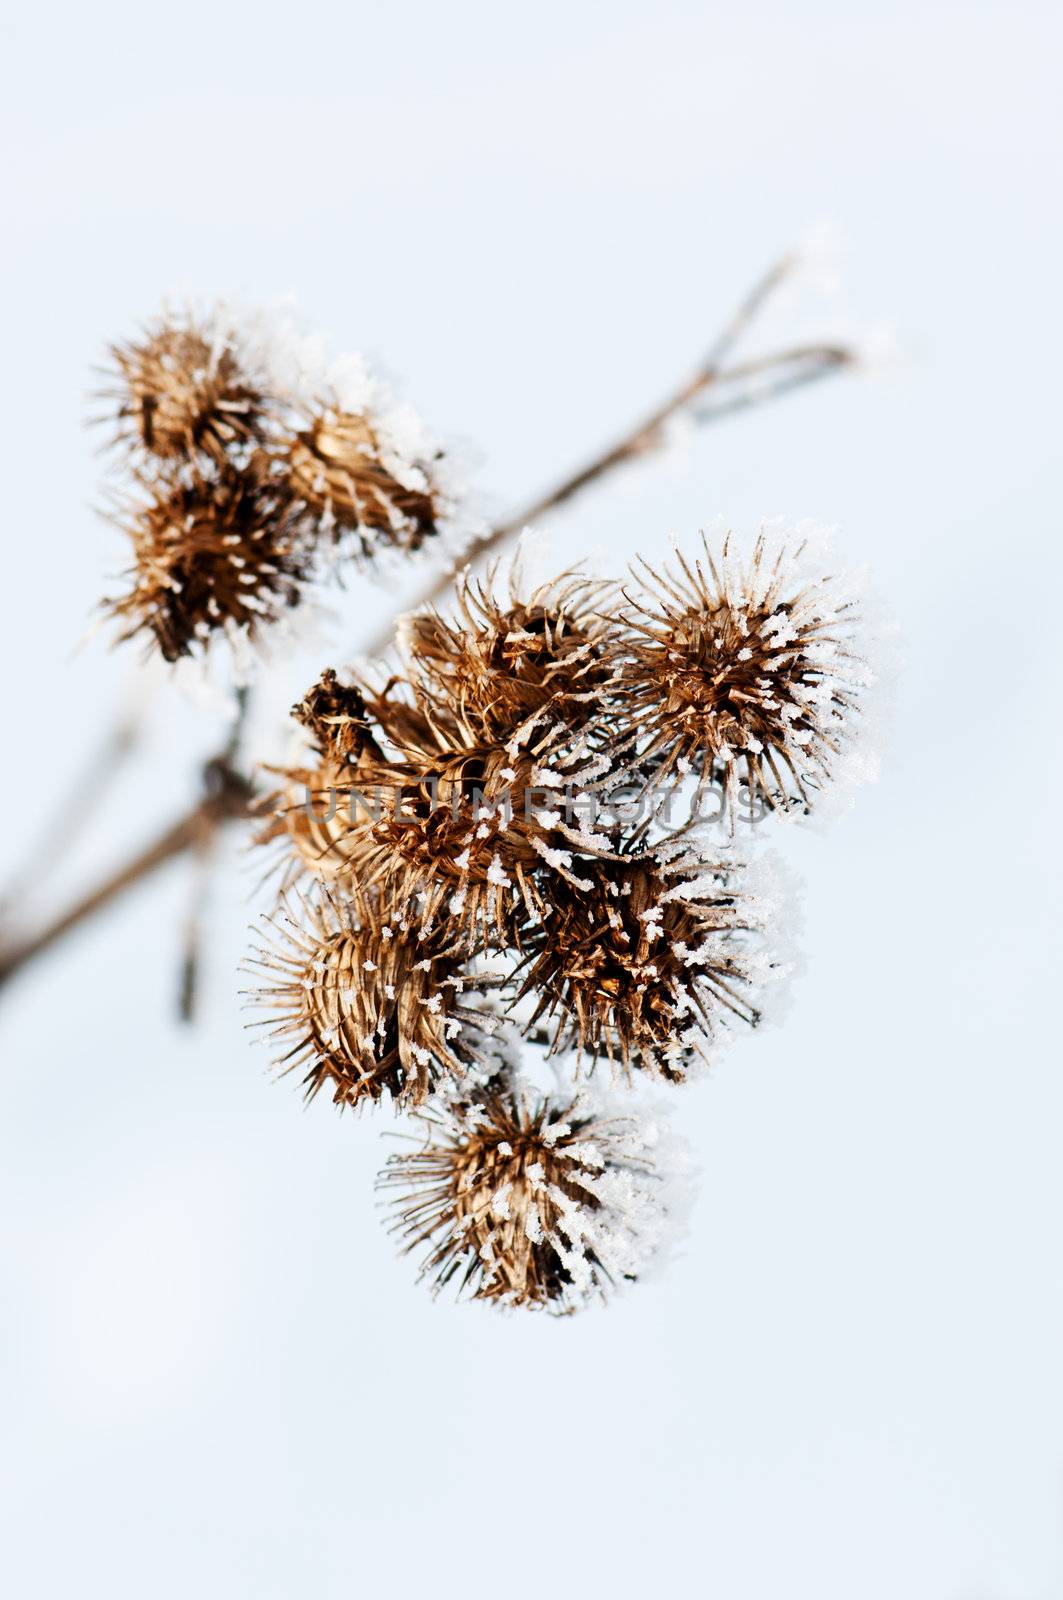 Dried flowers are covered with frost by Nanisimova